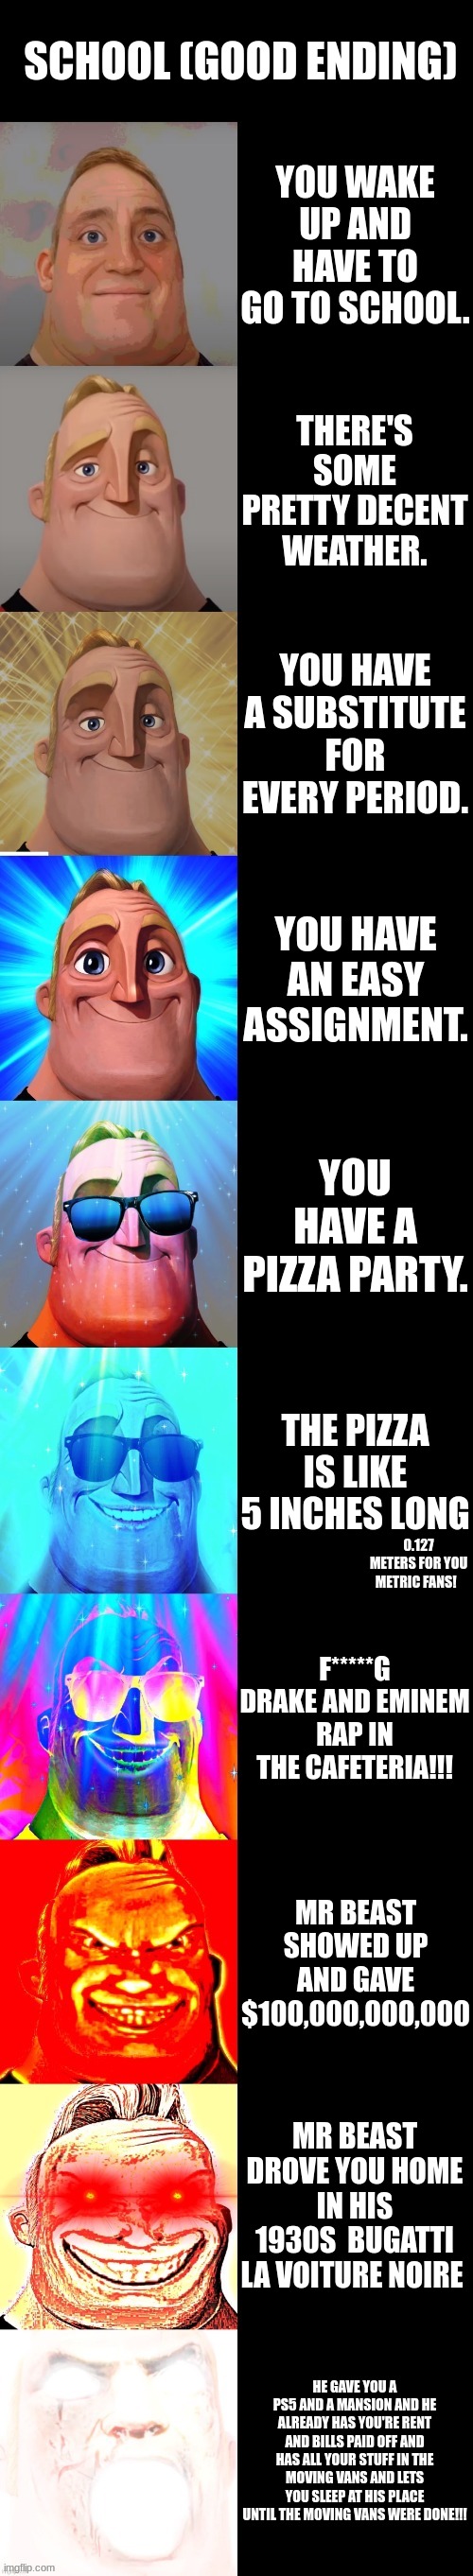 mr incredible becoming canny | SCHOOL (GOOD ENDING); YOU WAKE UP AND HAVE TO GO TO SCHOOL. THERE'S SOME PRETTY DECENT WEATHER. YOU HAVE A SUBSTITUTE FOR EVERY PERIOD. YOU HAVE AN EASY ASSIGNMENT. YOU HAVE A PIZZA PARTY. THE PIZZA IS LIKE 5 INCHES LONG; 0.127 METERS FOR YOU METRIC FANS! F*****G DRAKE AND EMINEM RAP IN THE CAFETERIA!!! MR BEAST SHOWED UP AND GAVE $100,000,000,000; MR BEAST DROVE YOU HOME IN HIS 1930S  BUGATTI LA VOITURE NOIRE; HE GAVE YOU A PS5 AND A MANSION AND HE ALREADY HAS YOU'RE RENT AND BILLS PAID OFF AND HAS ALL YOUR STUFF IN THE MOVING VANS AND LETS YOU SLEEP AT HIS PLACE UNTIL THE MOVING VANS WERE DONE!!! | image tagged in mr incredible becoming canny,fun,cool,imgflip,nice as 69,happy | made w/ Imgflip meme maker